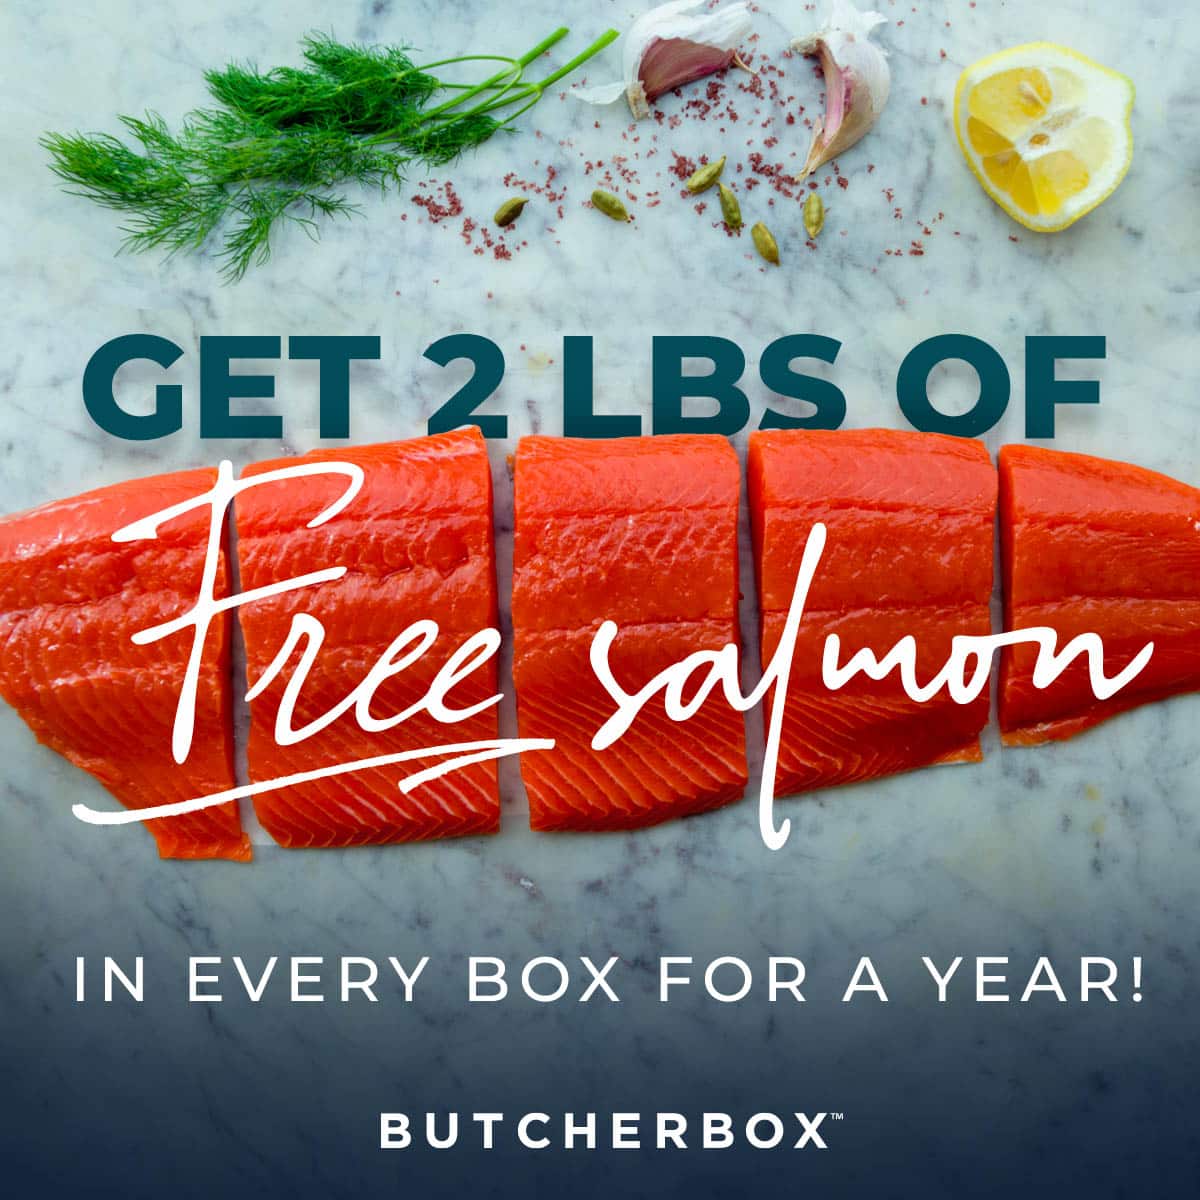 Free Salmon for a year!